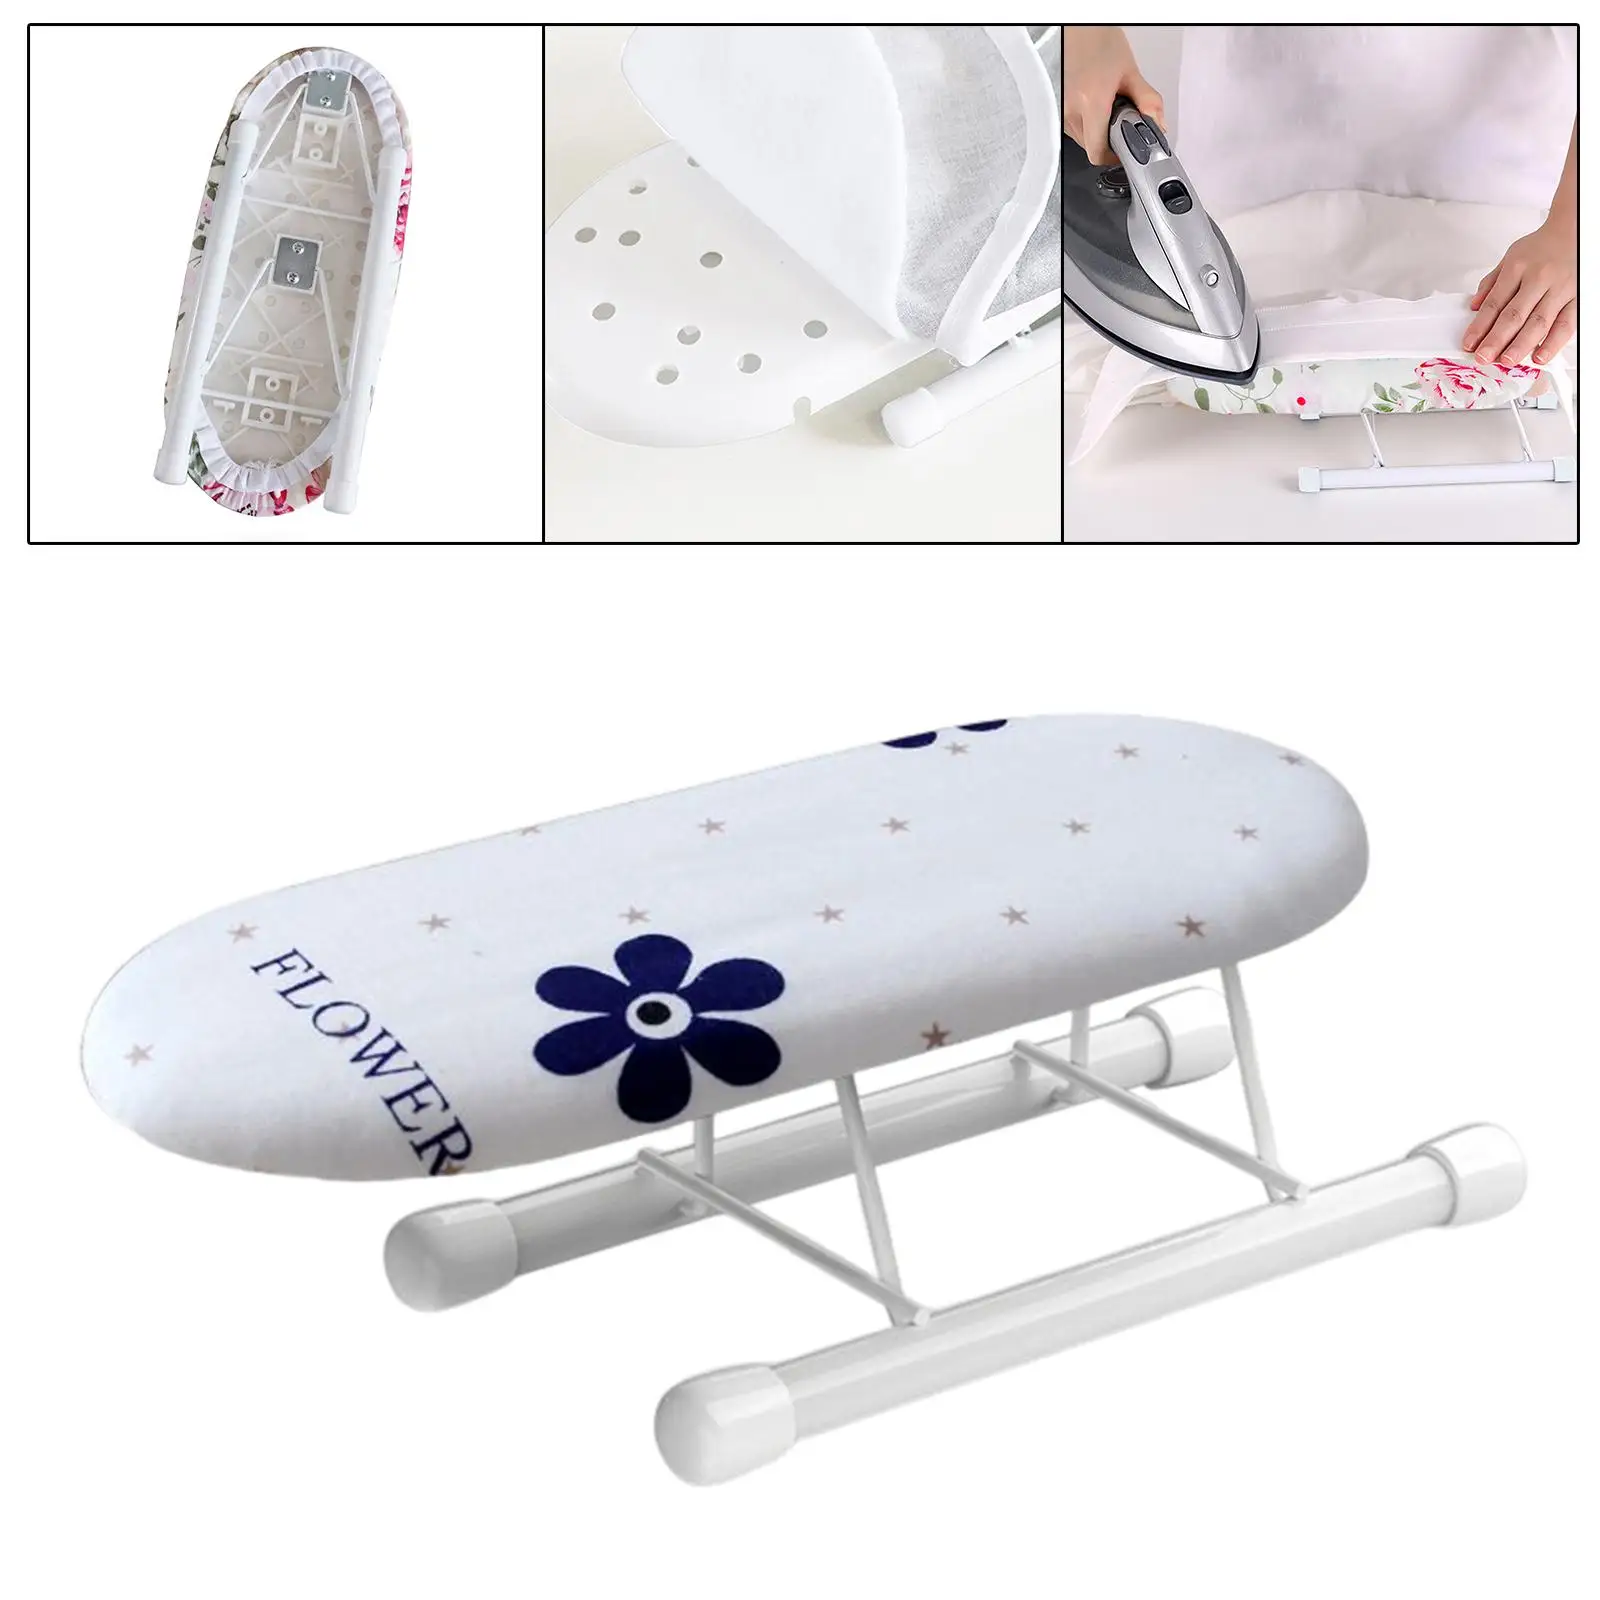 Travel Ironing Board Removable Sleeve Mini Folding Ironing Accessories for Travel Household Dorms Home Ironing Clothes